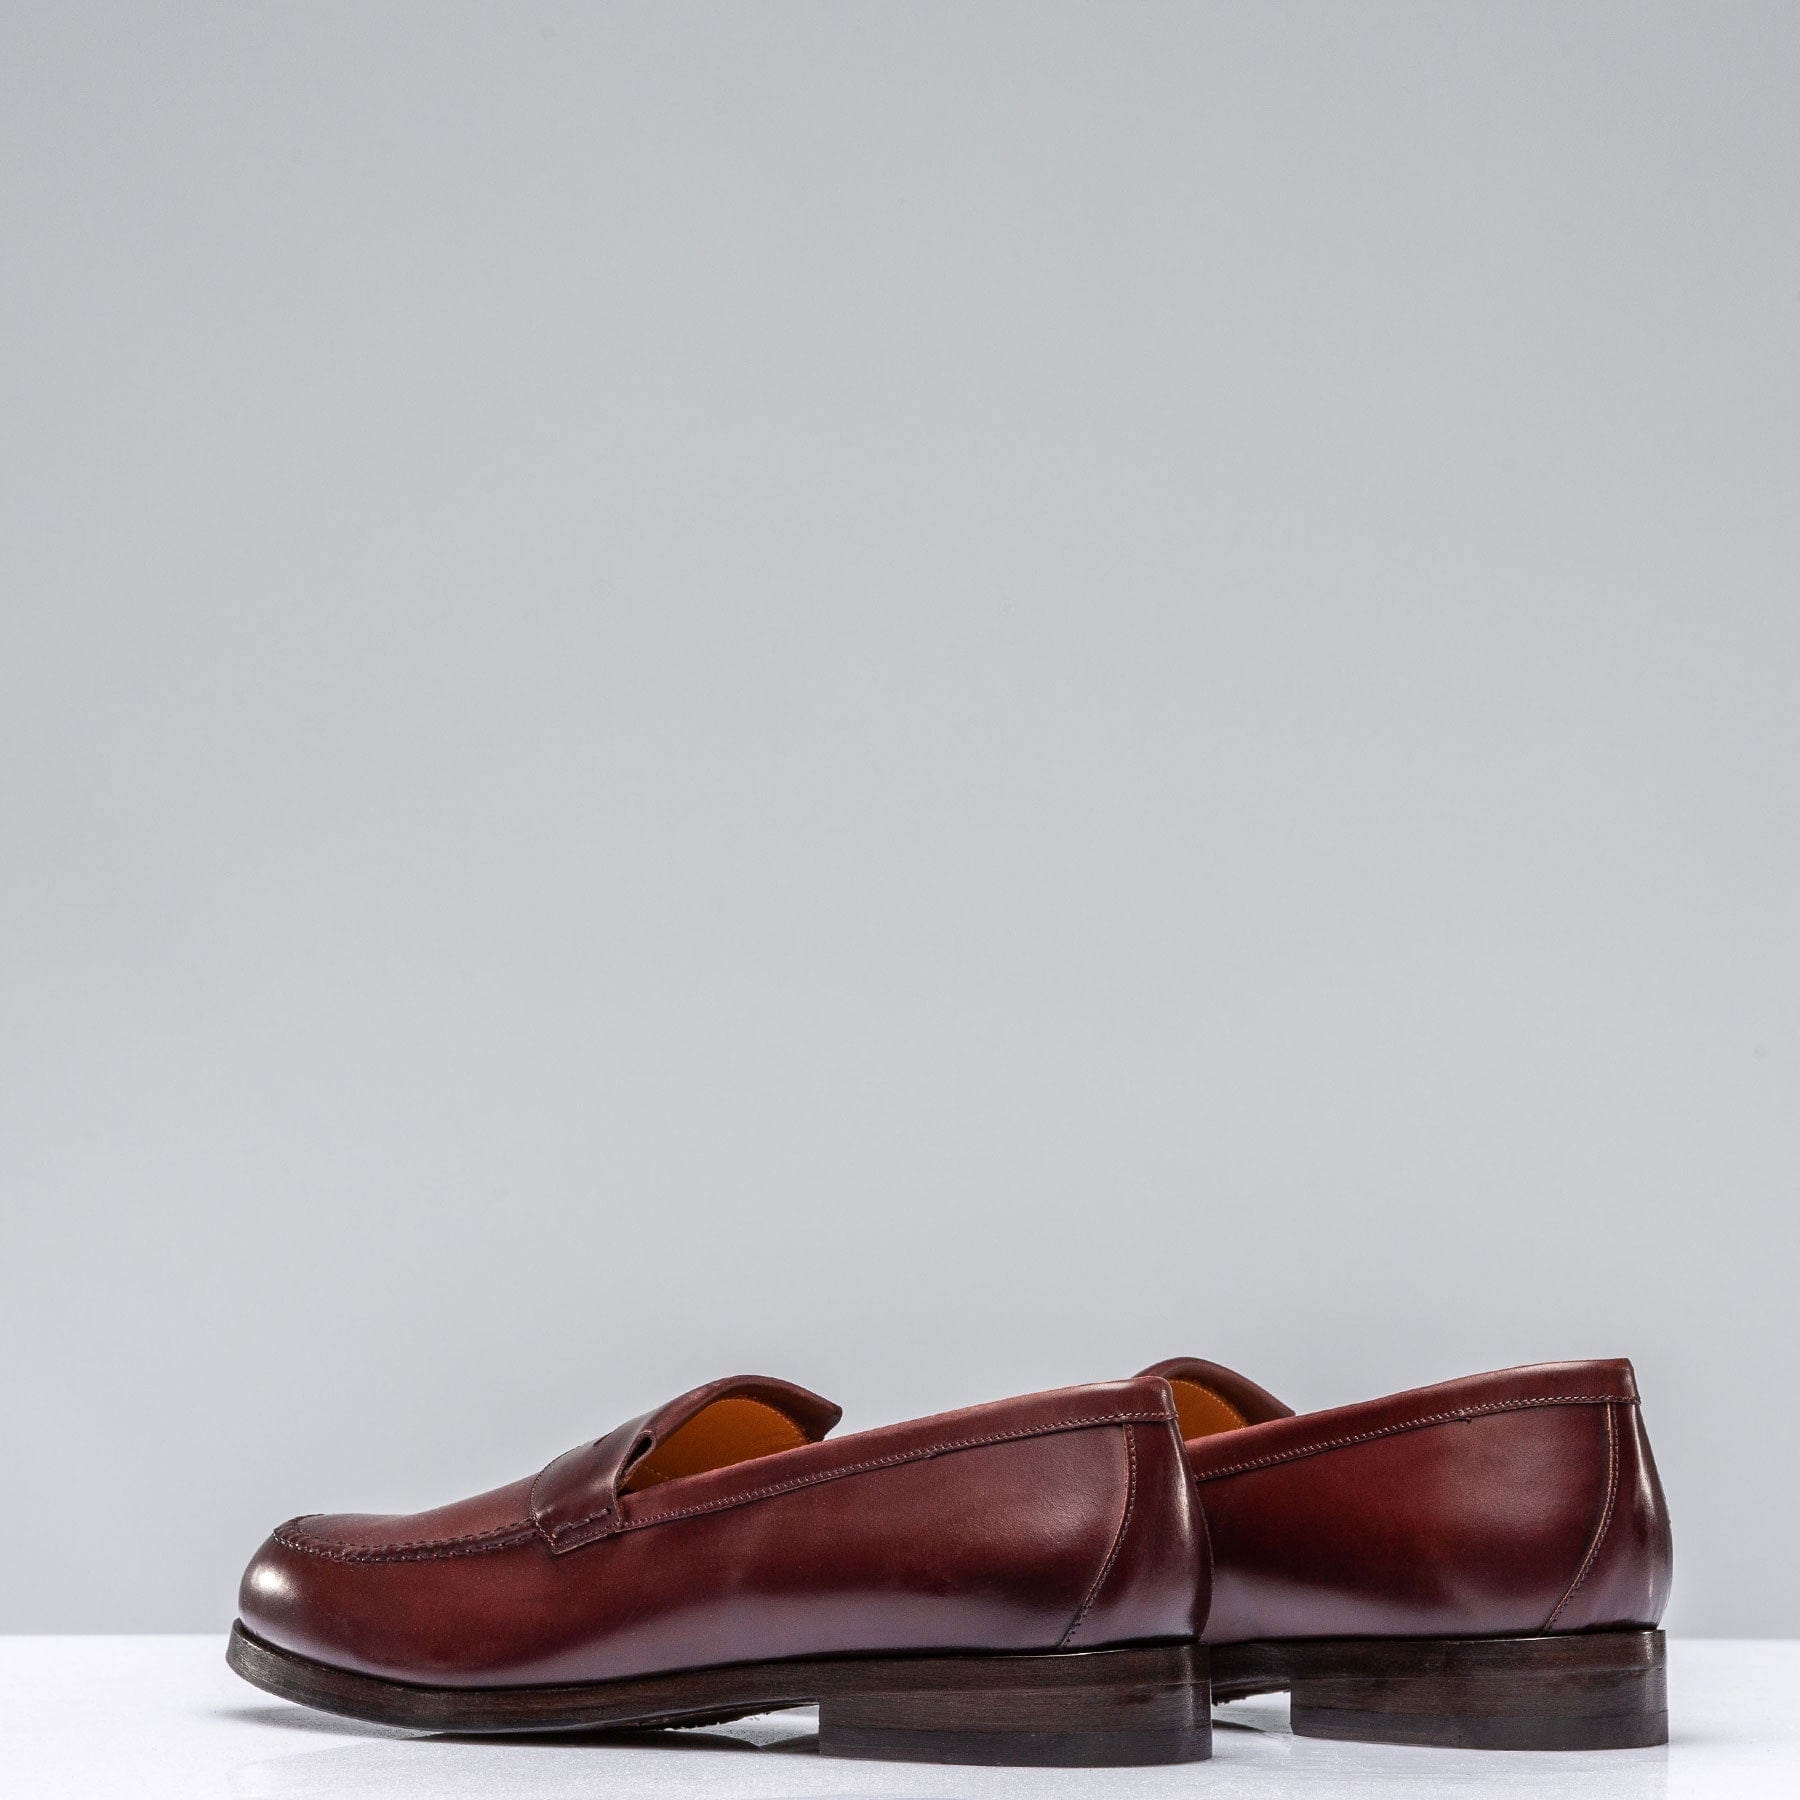 Lucro Loafer In Burgundy Antique - AXEL'S